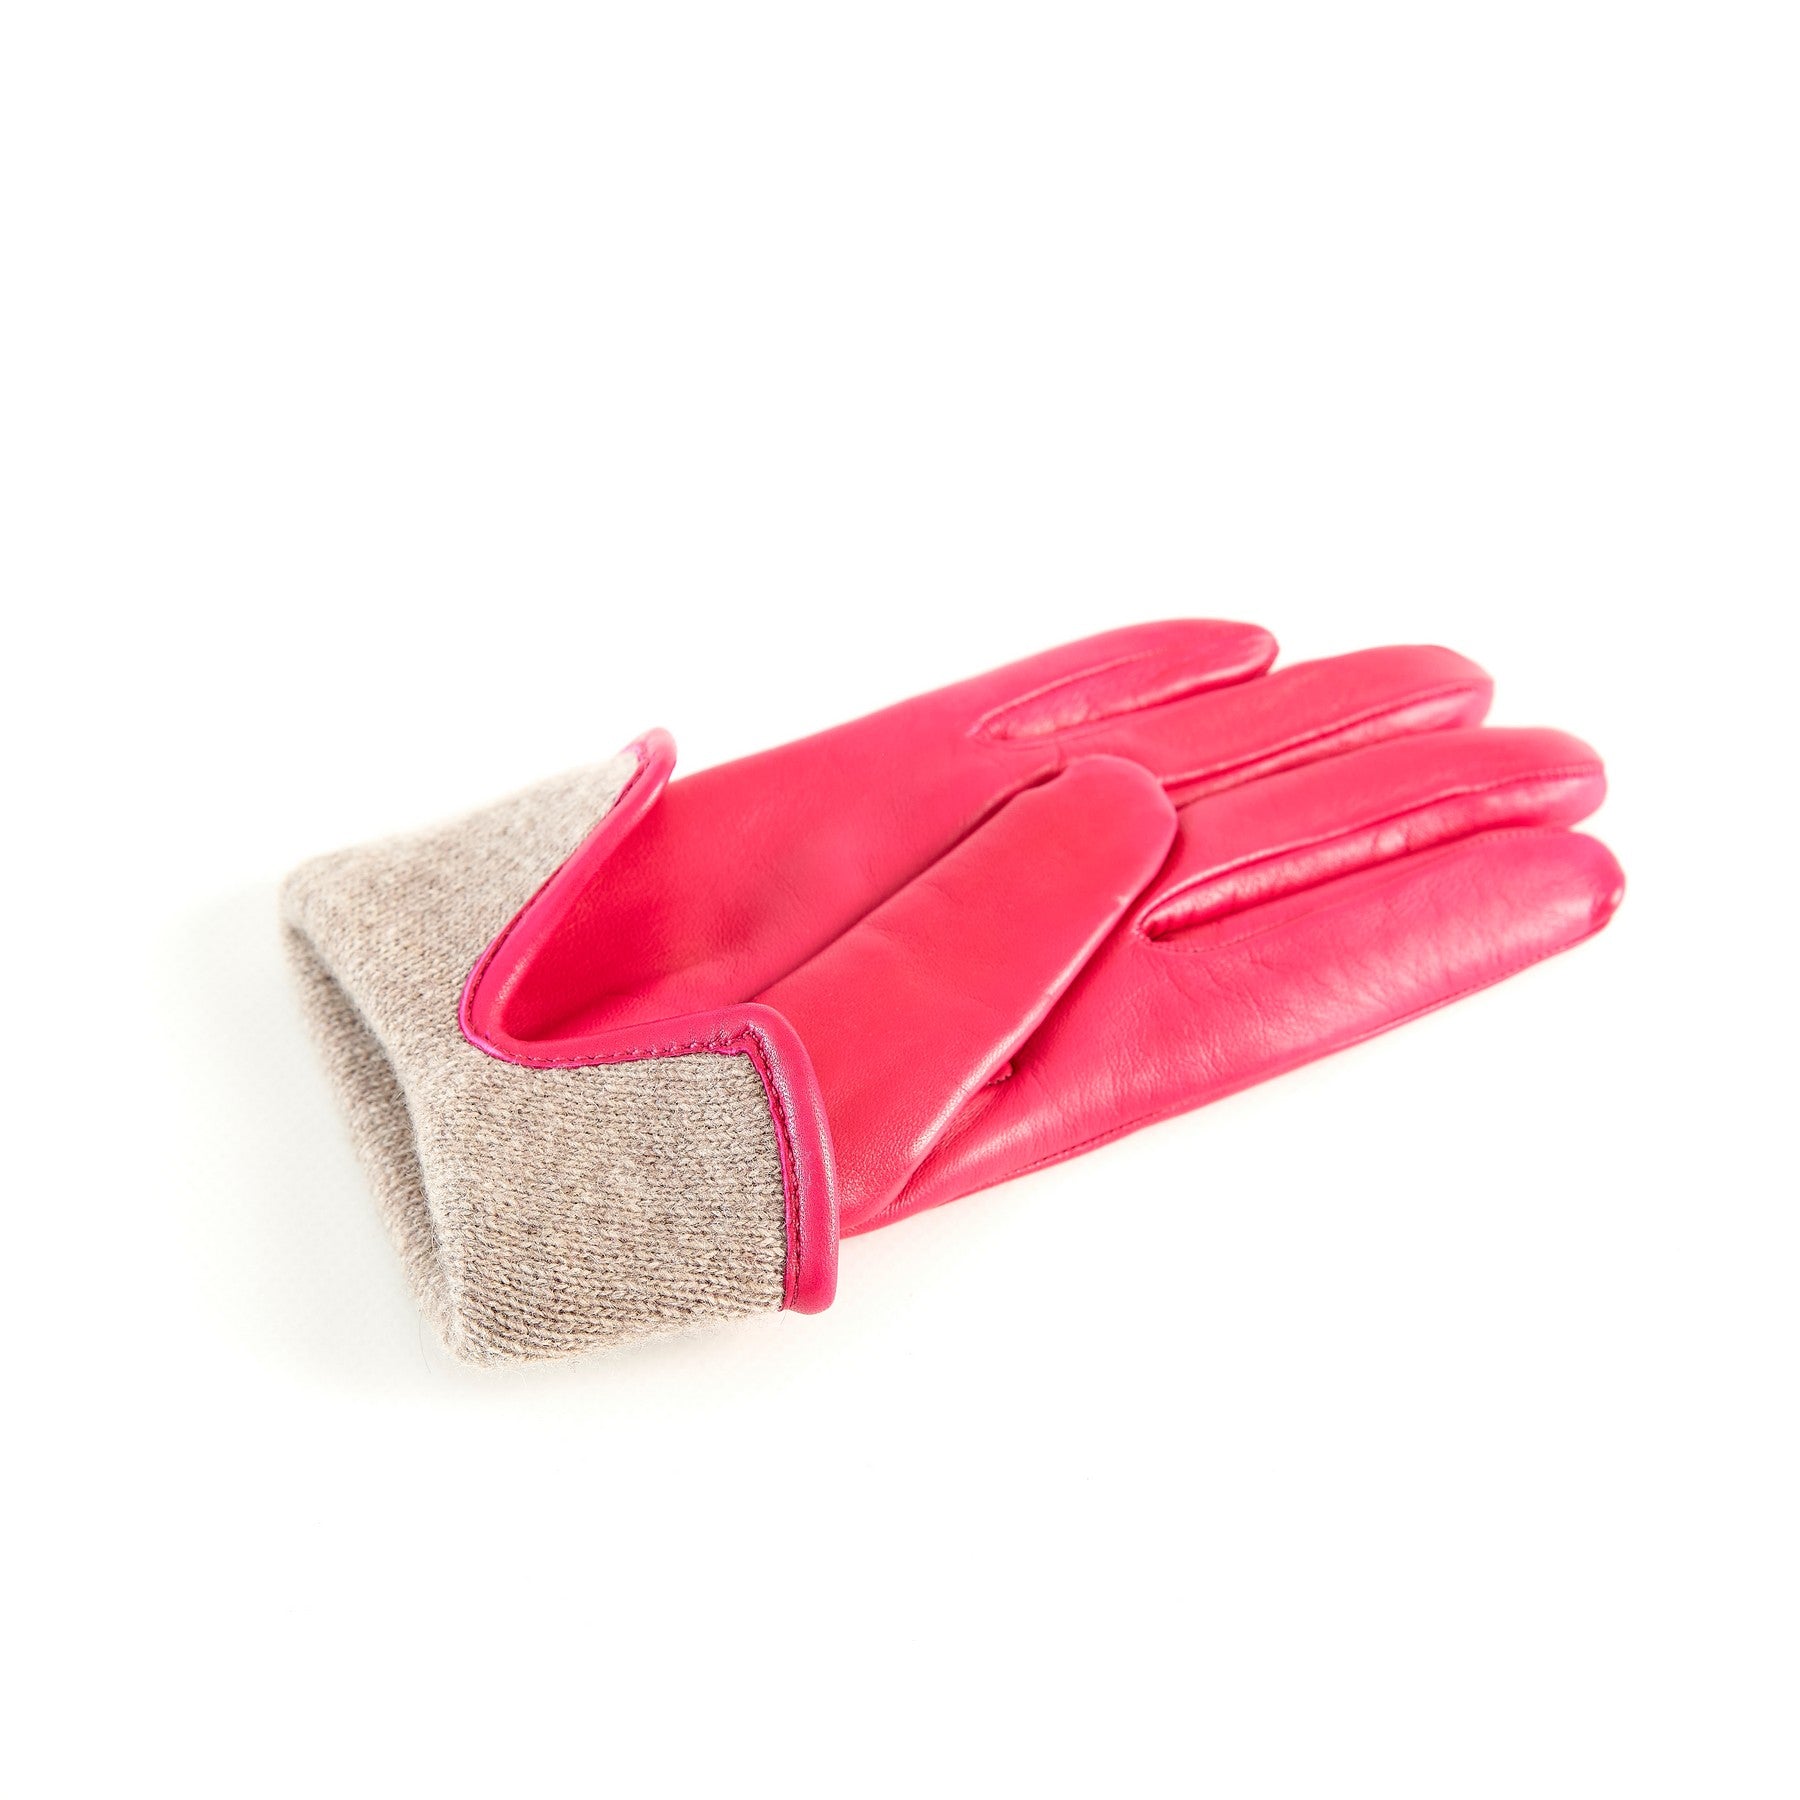 Women’s basic deep pink soft nappa leather gloves with palm opening and mix cashmere lining